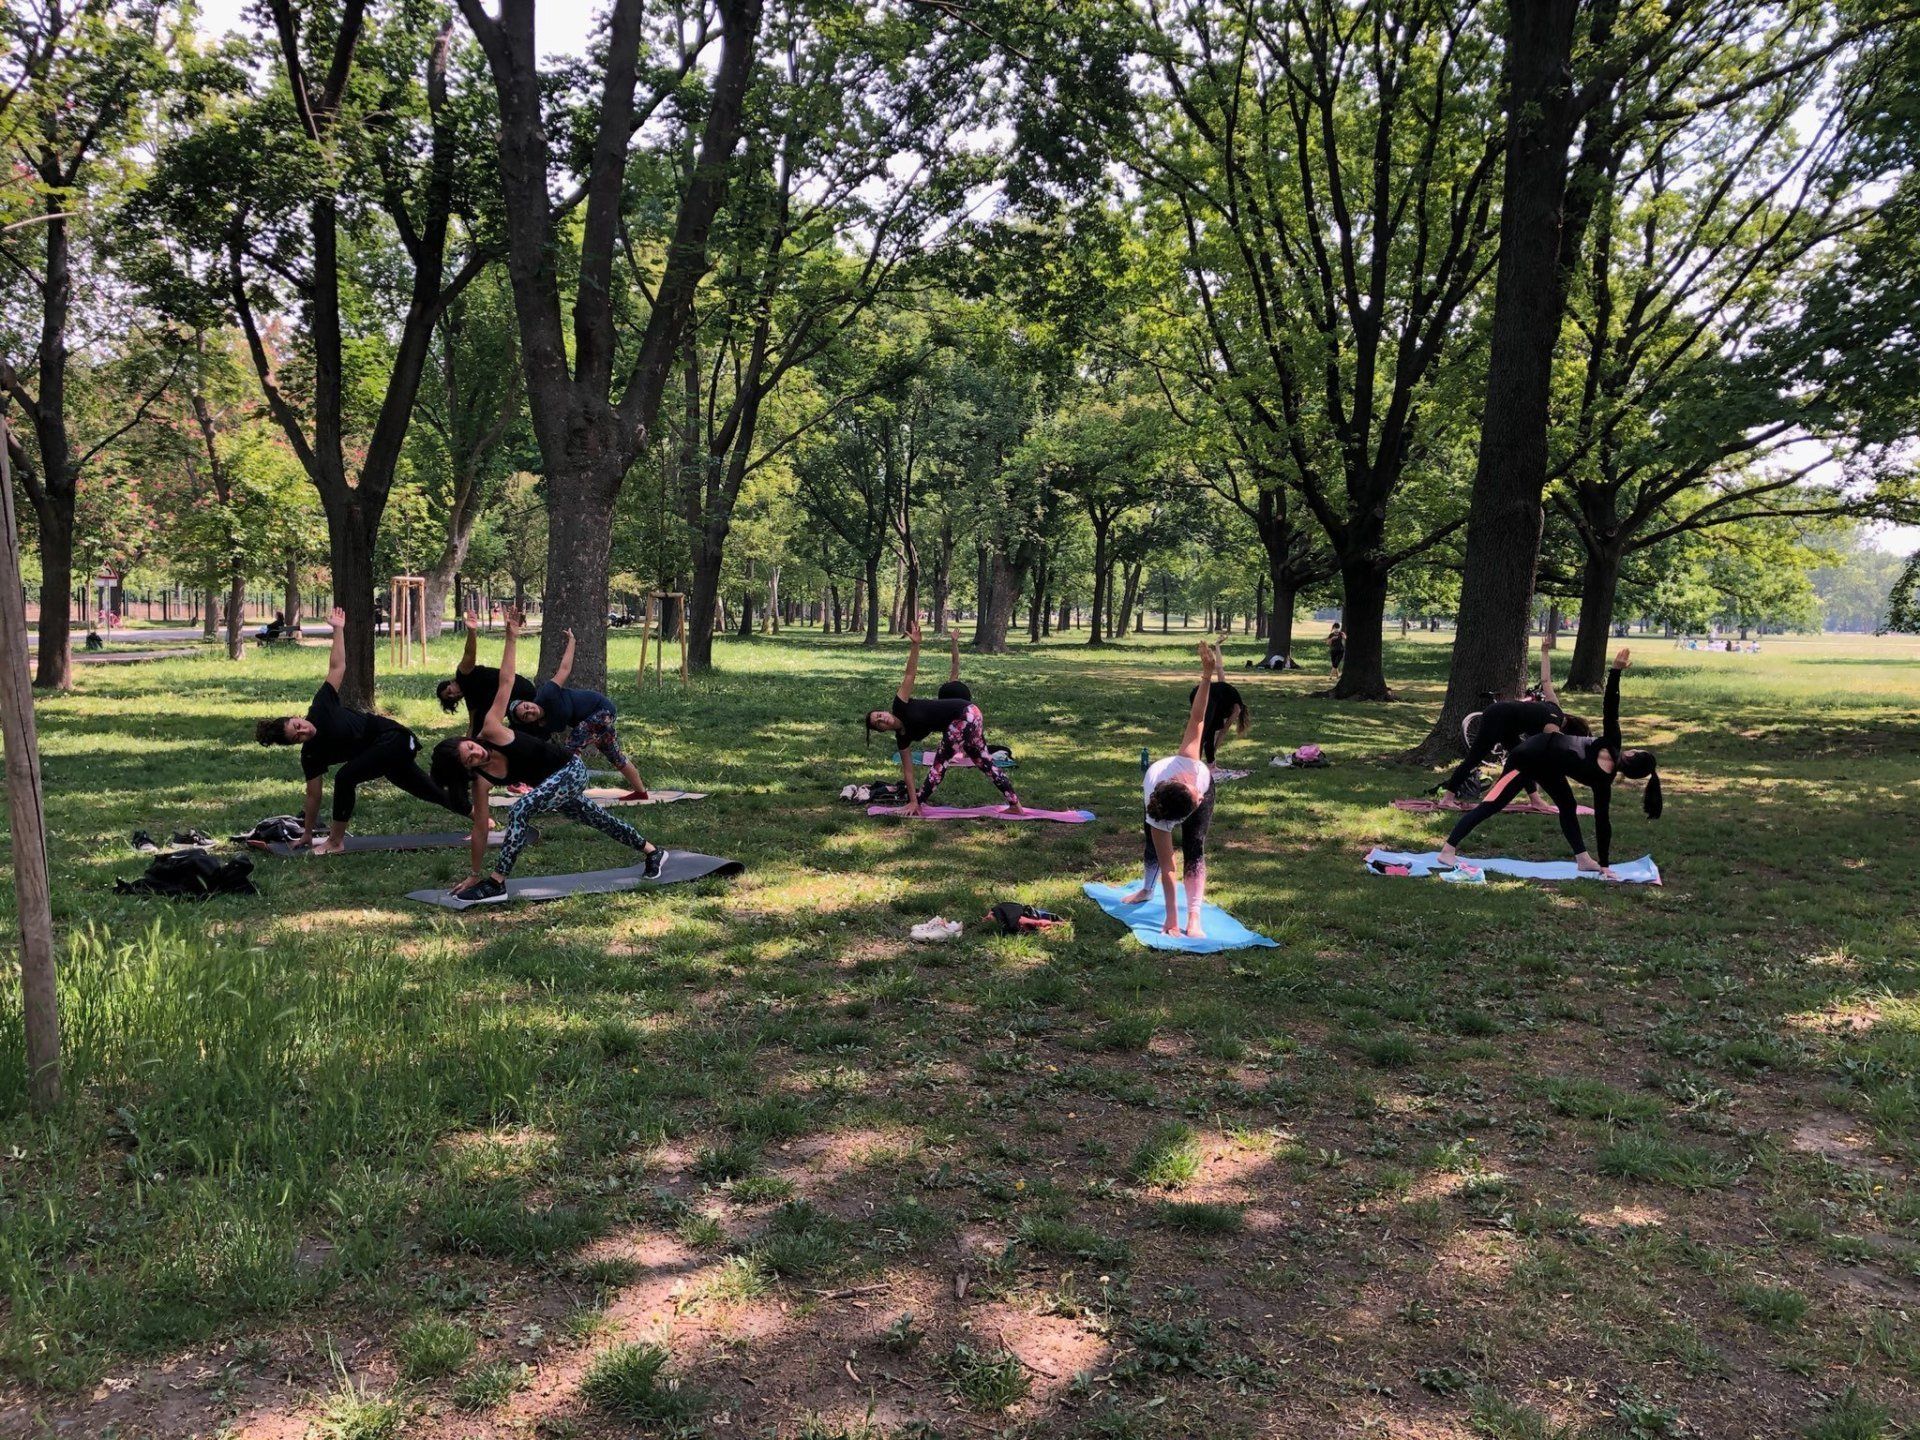 yoga in the park 2020 was a highlight